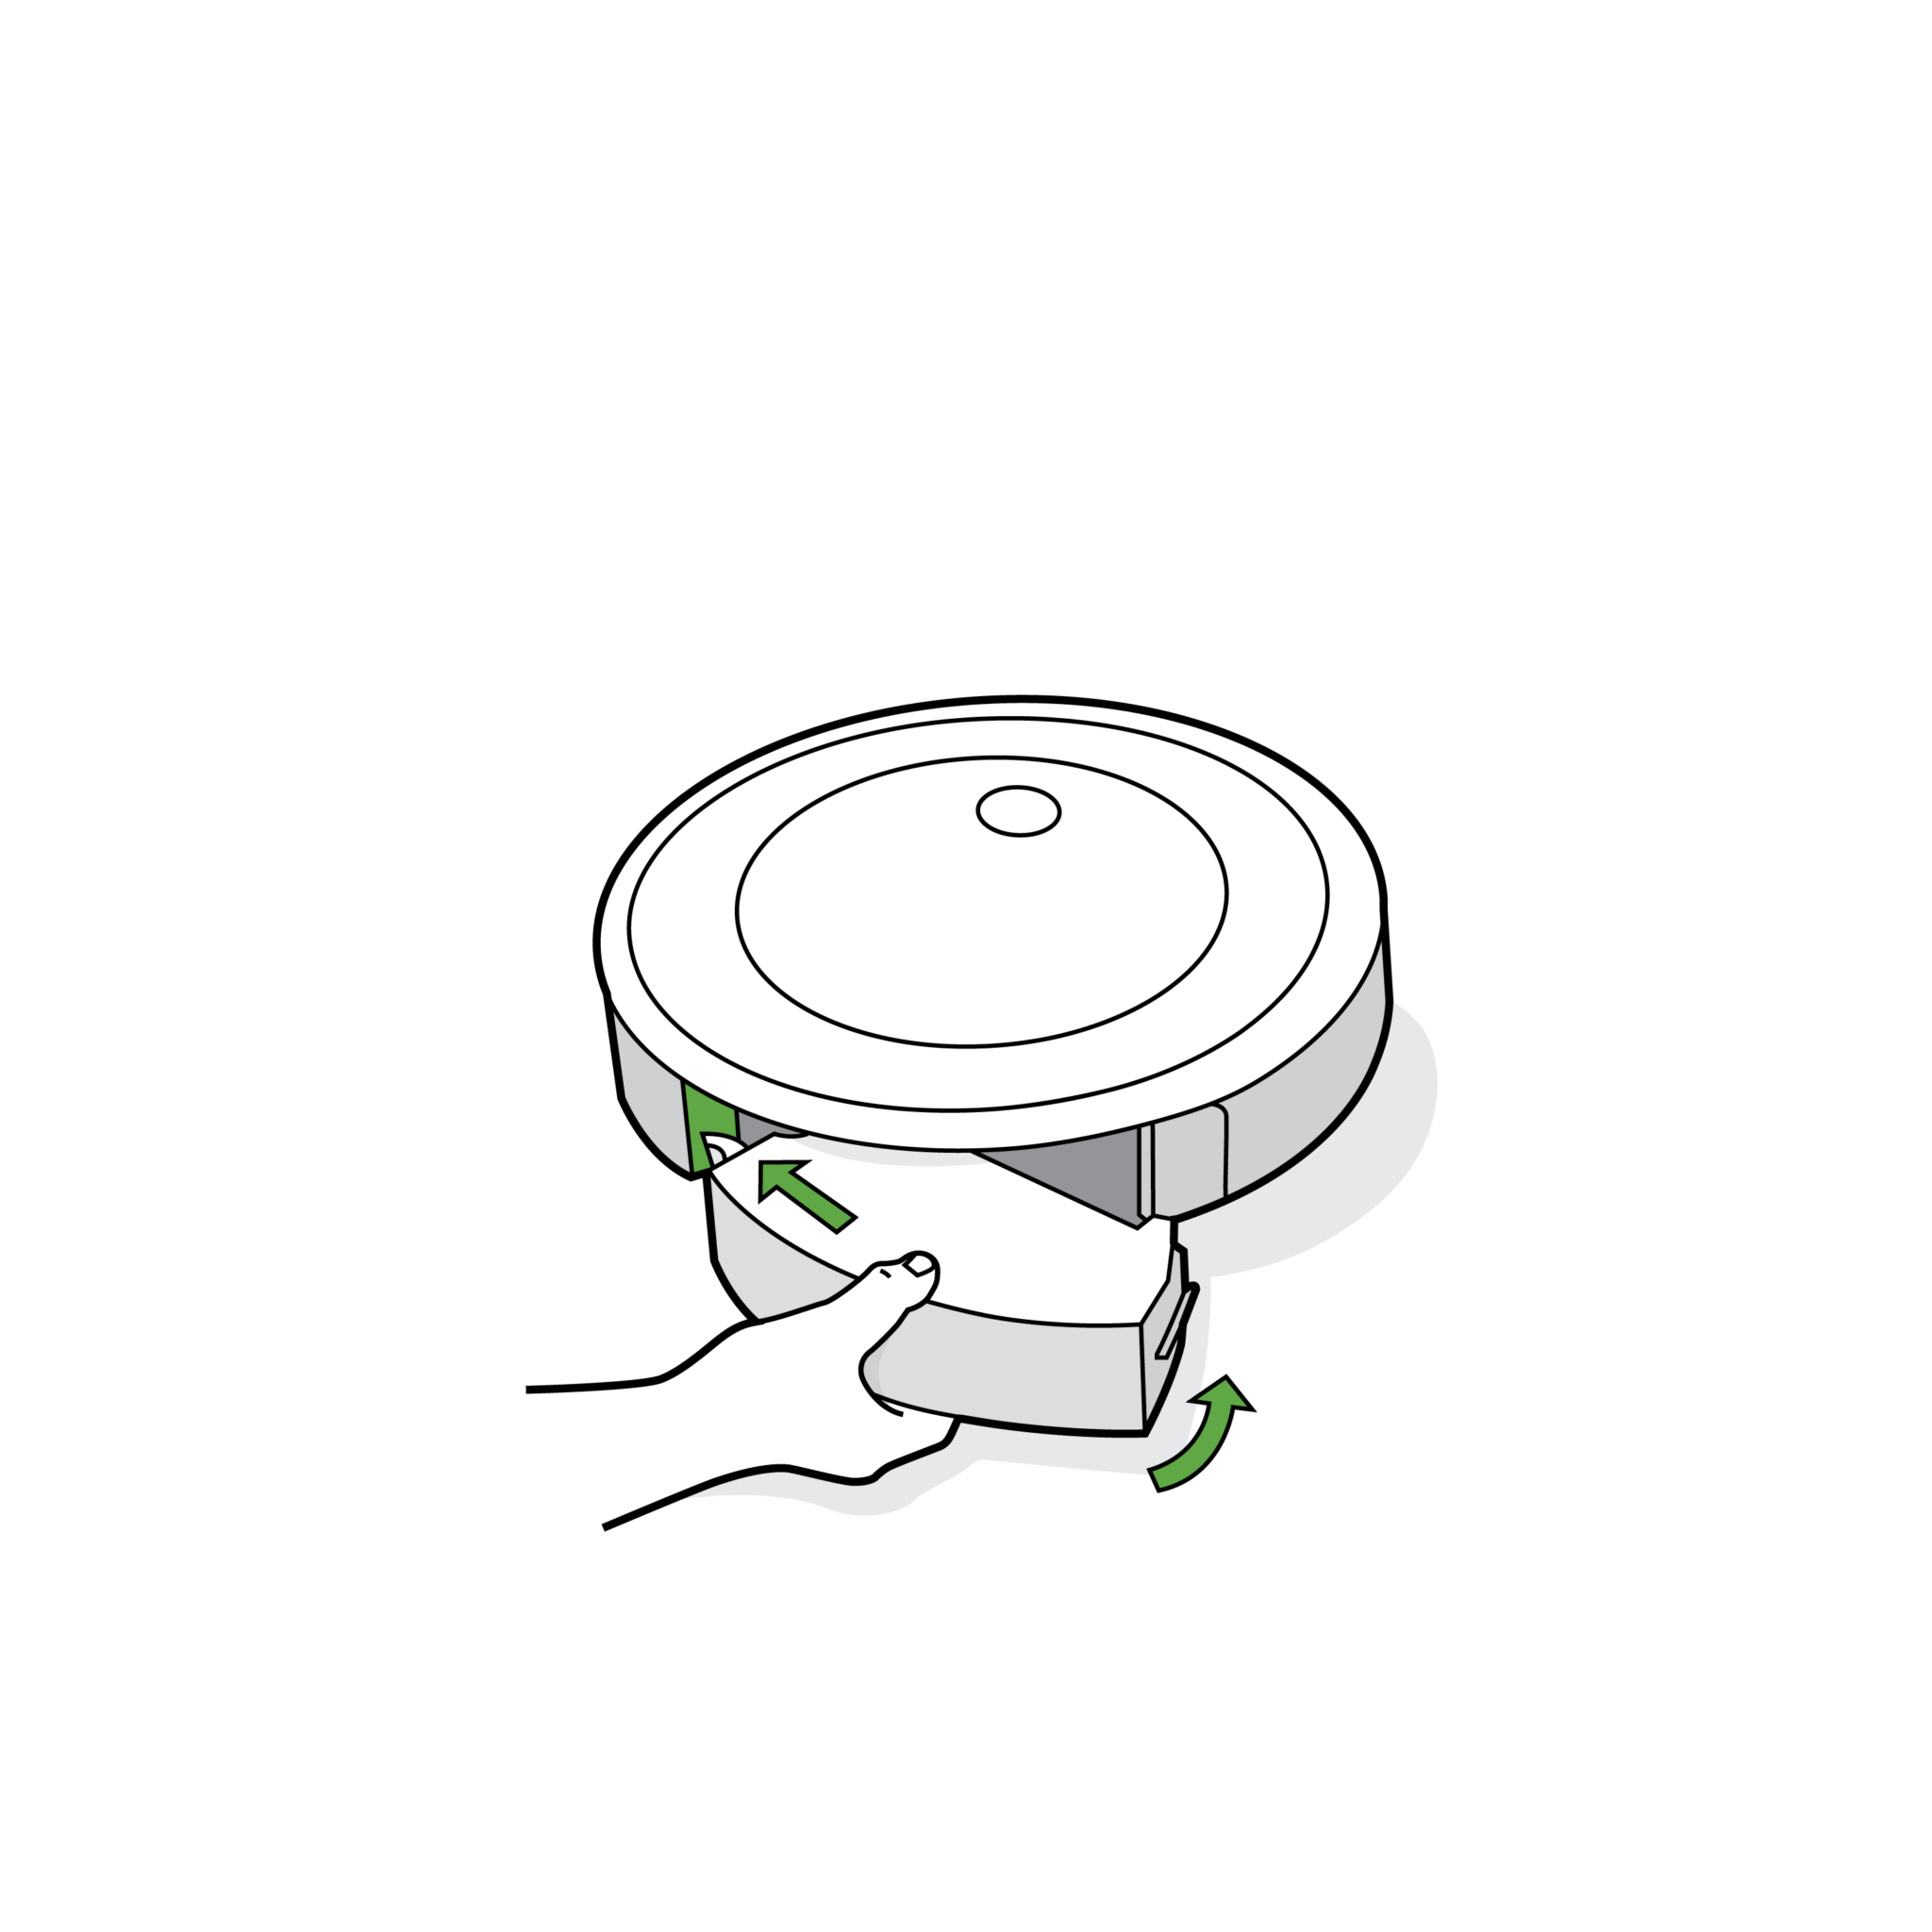 roomba-error-code-troubleshooting-guide-all-models-cleaners-talk